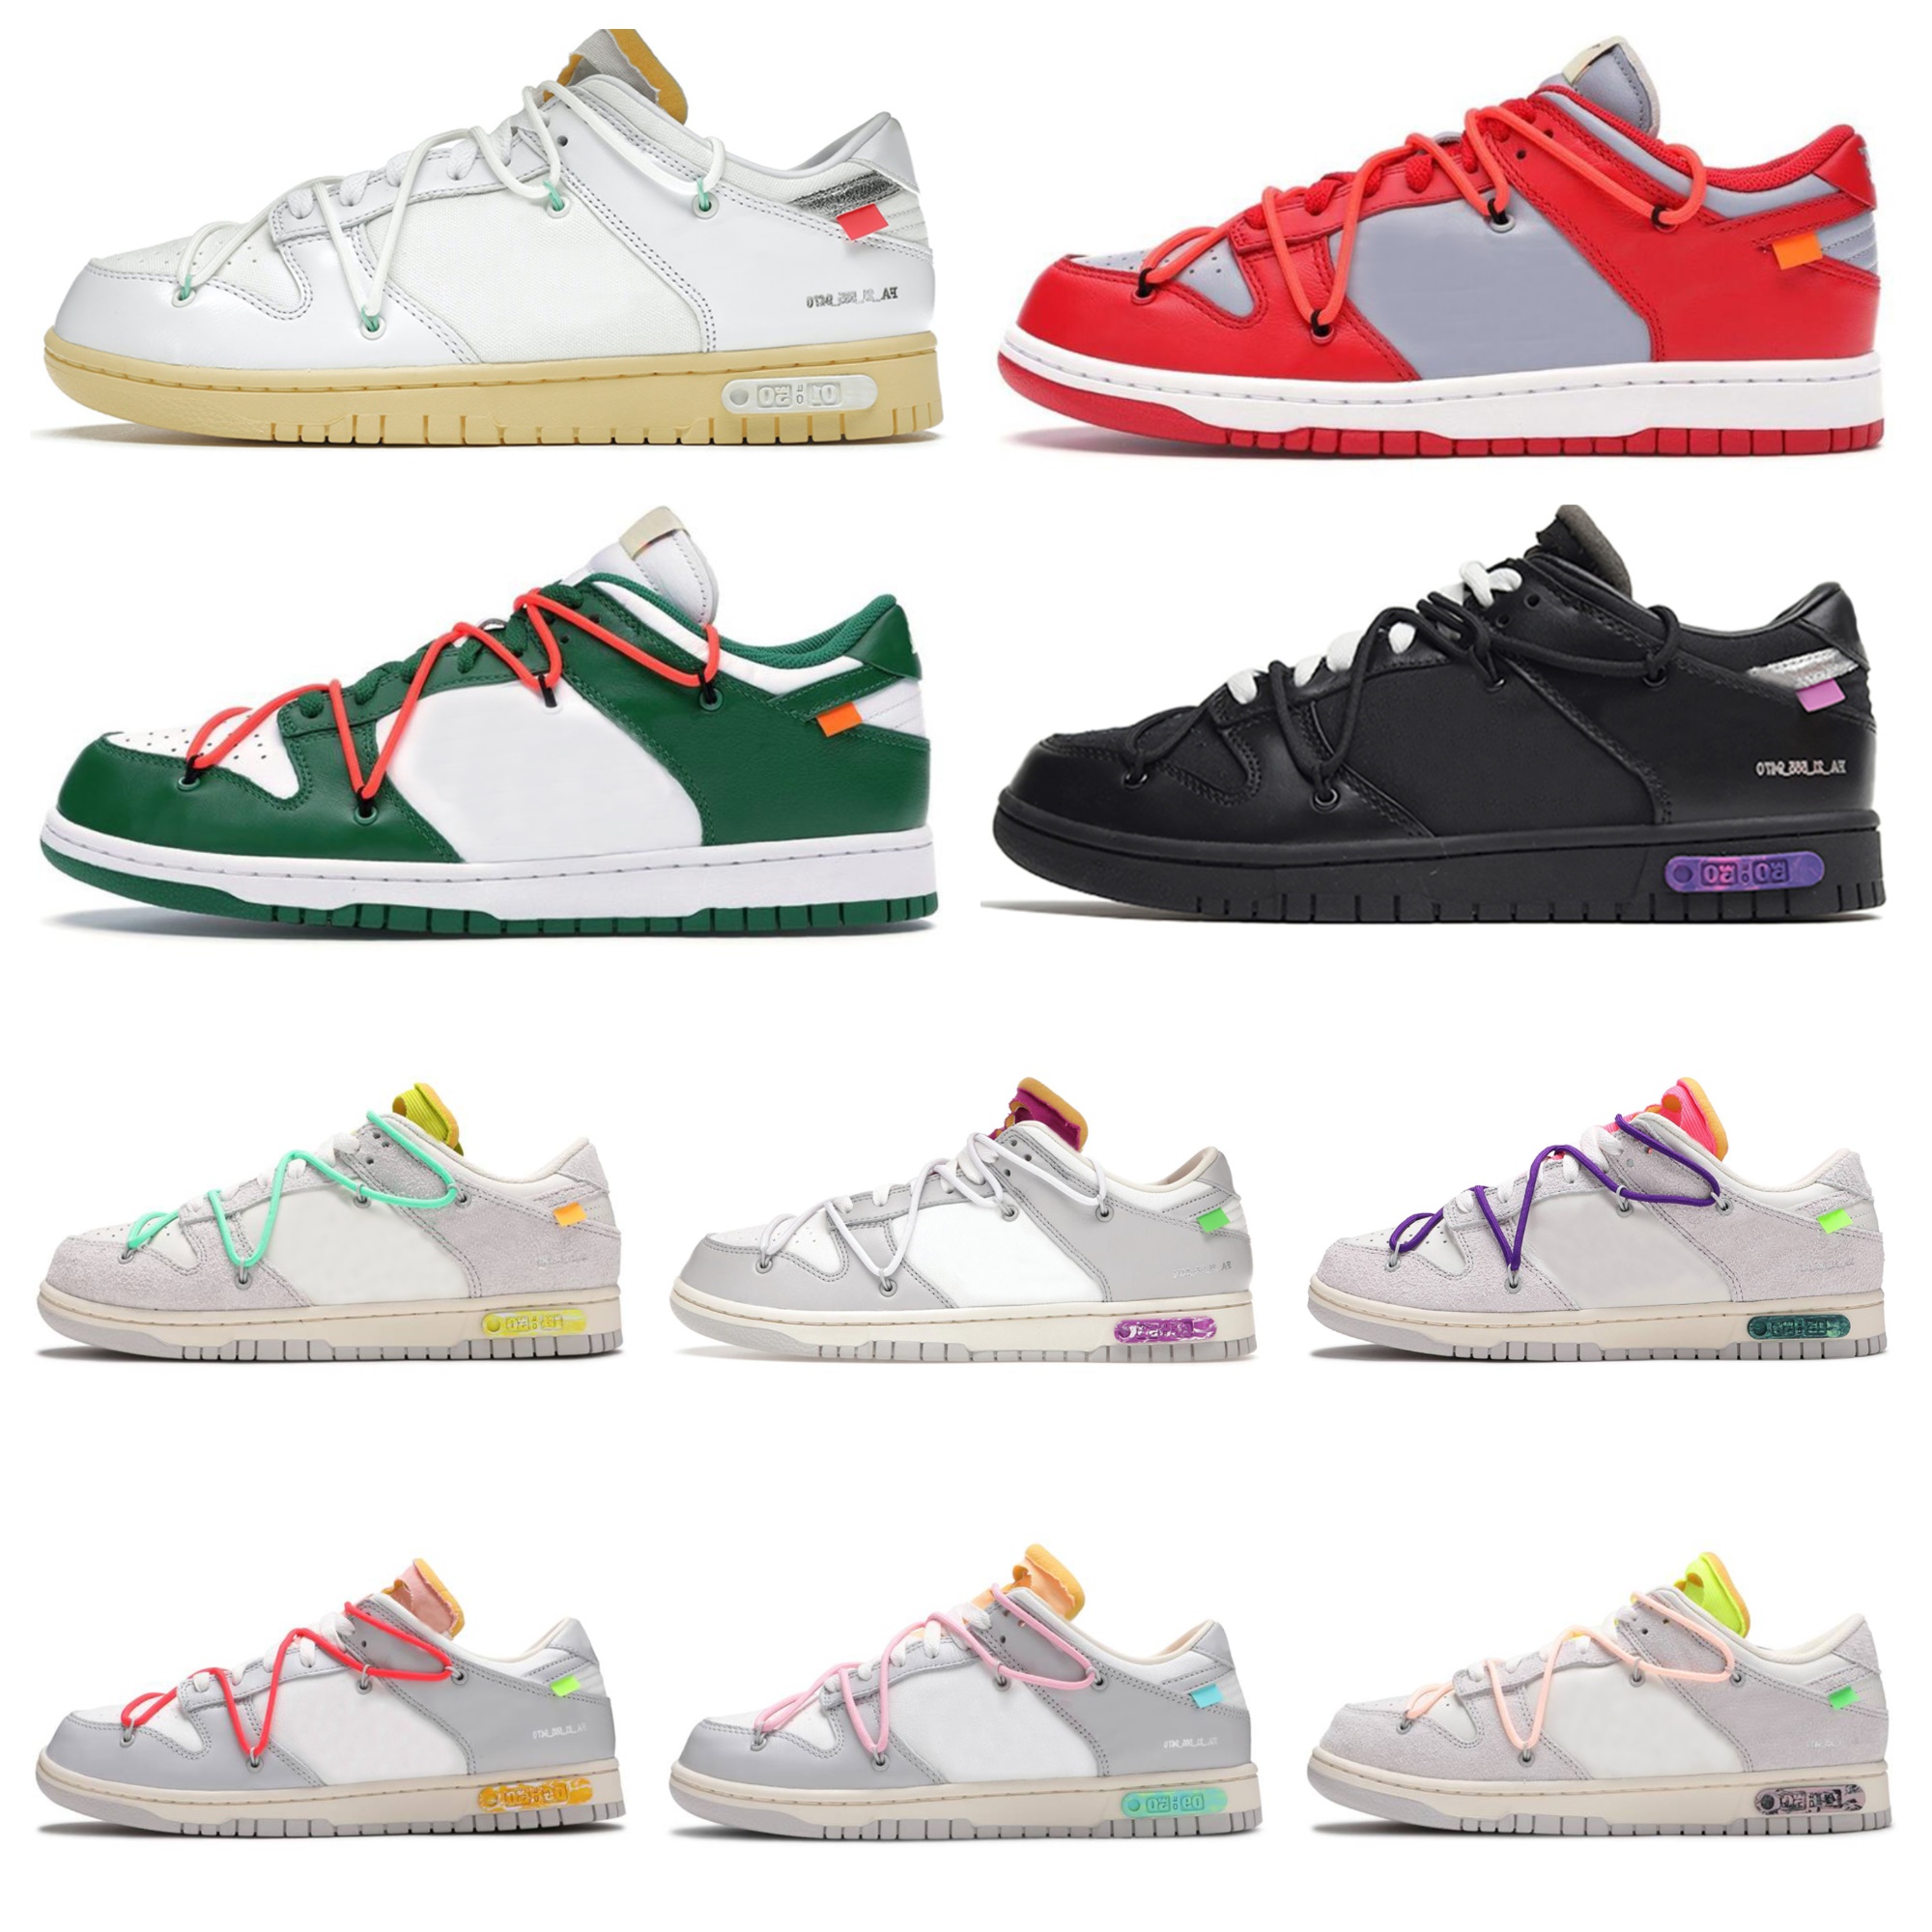 

DUnkSb Casual ShOes Dear Summer Lot 1 05 Of 50 Collection Red Pine Orange Green SB LOW DuNkS White OW The 50 TS Trainer Chunky Mens Women SBDUNK Designers Sports Sneakers, Bubble package bag